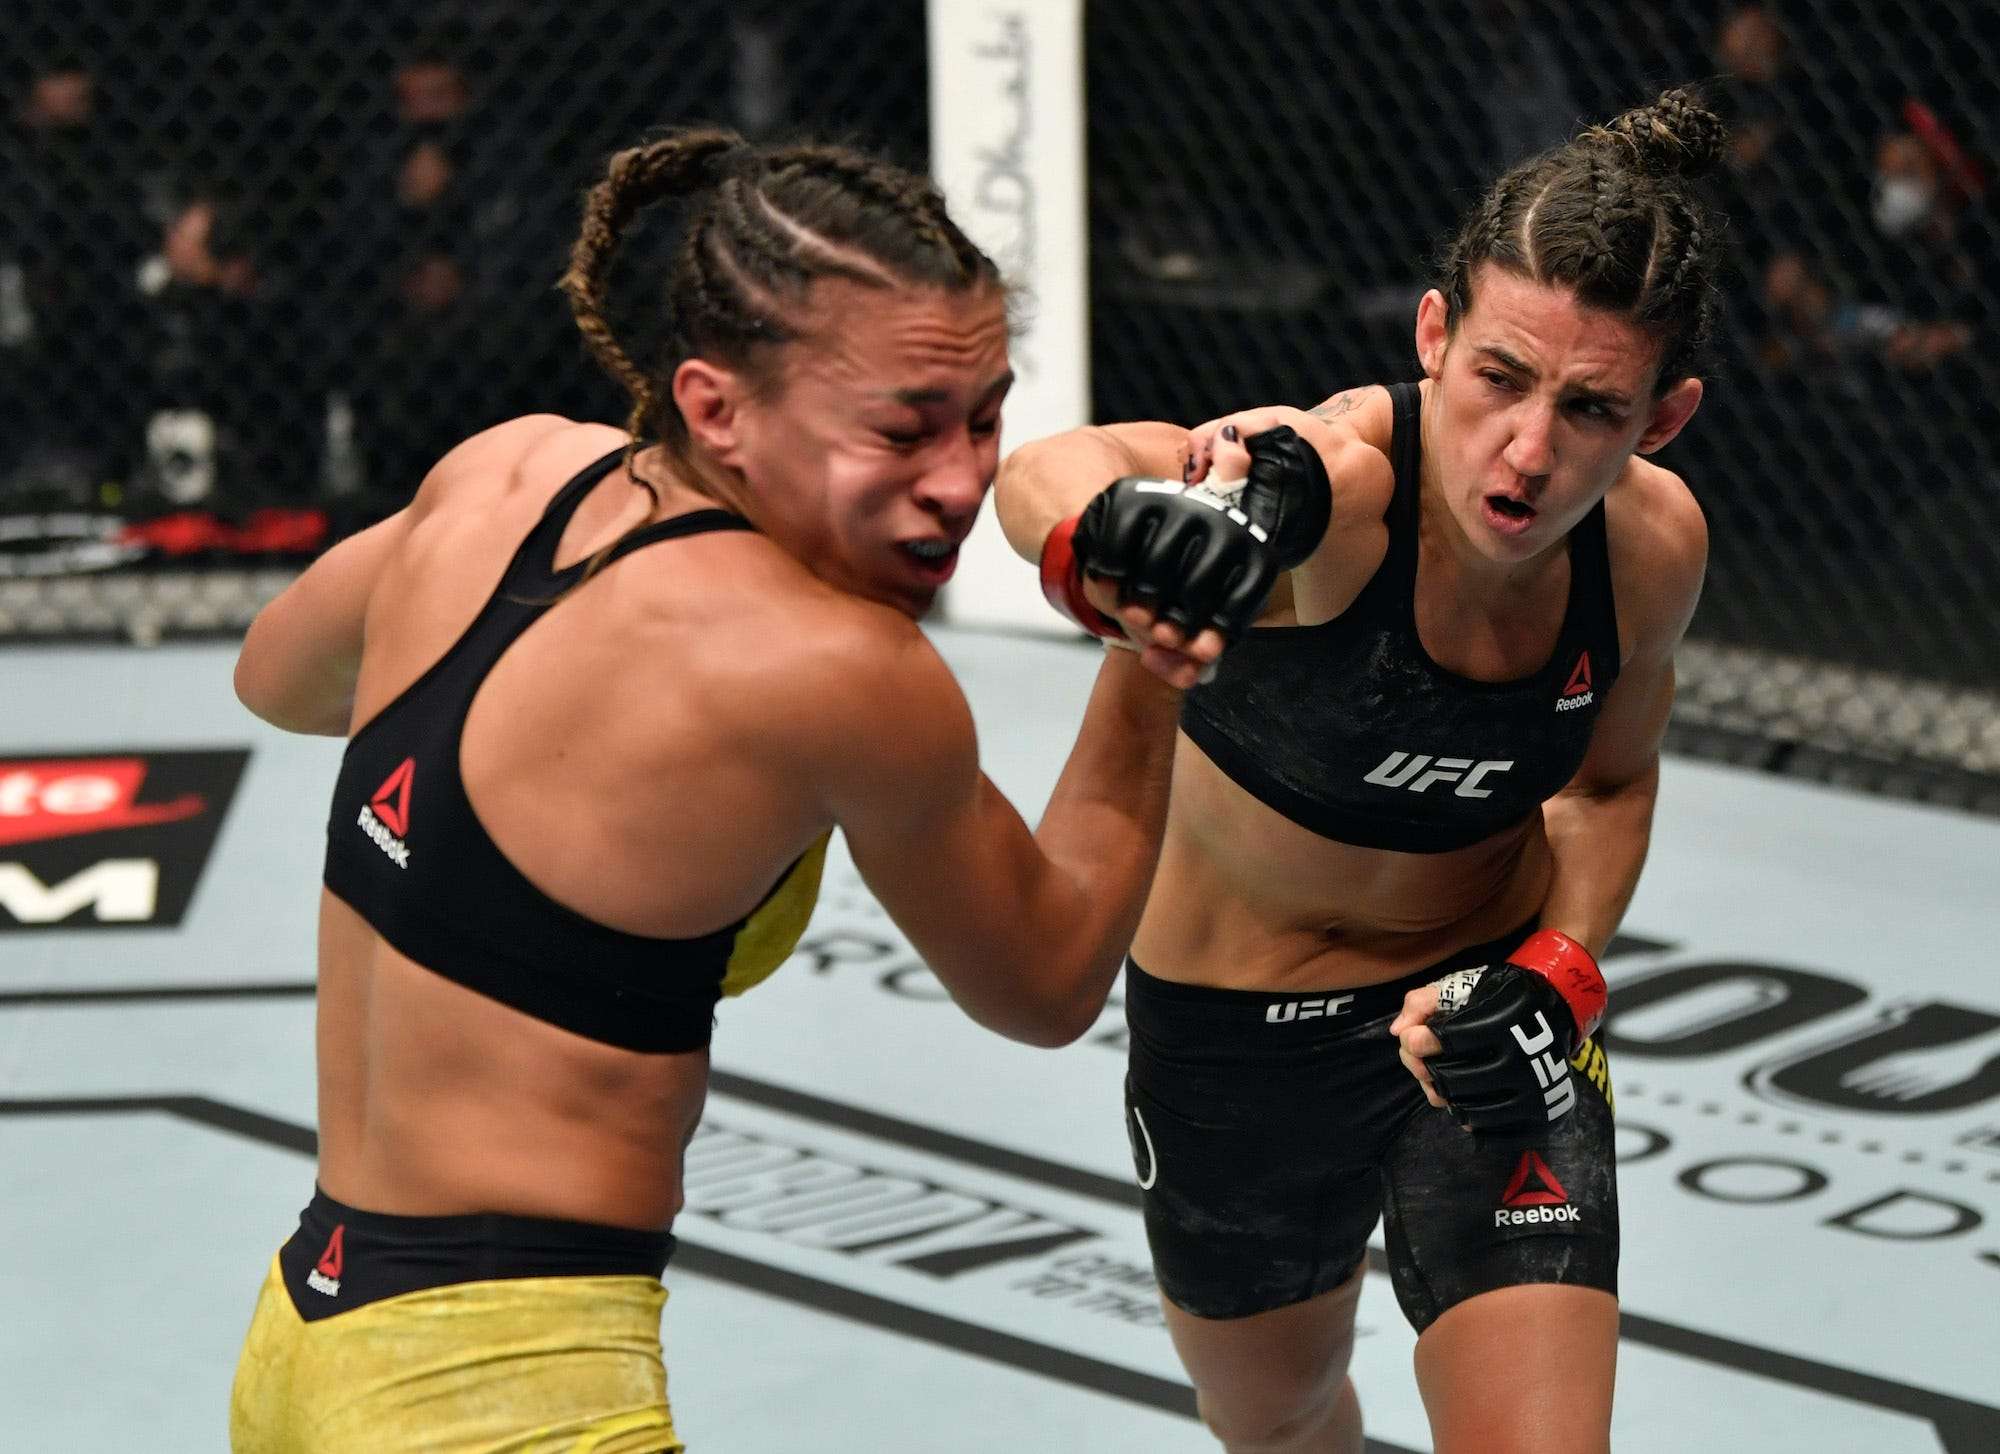 MMA fan favorite Amanda Ribas appeared to be knocked out twice in upset